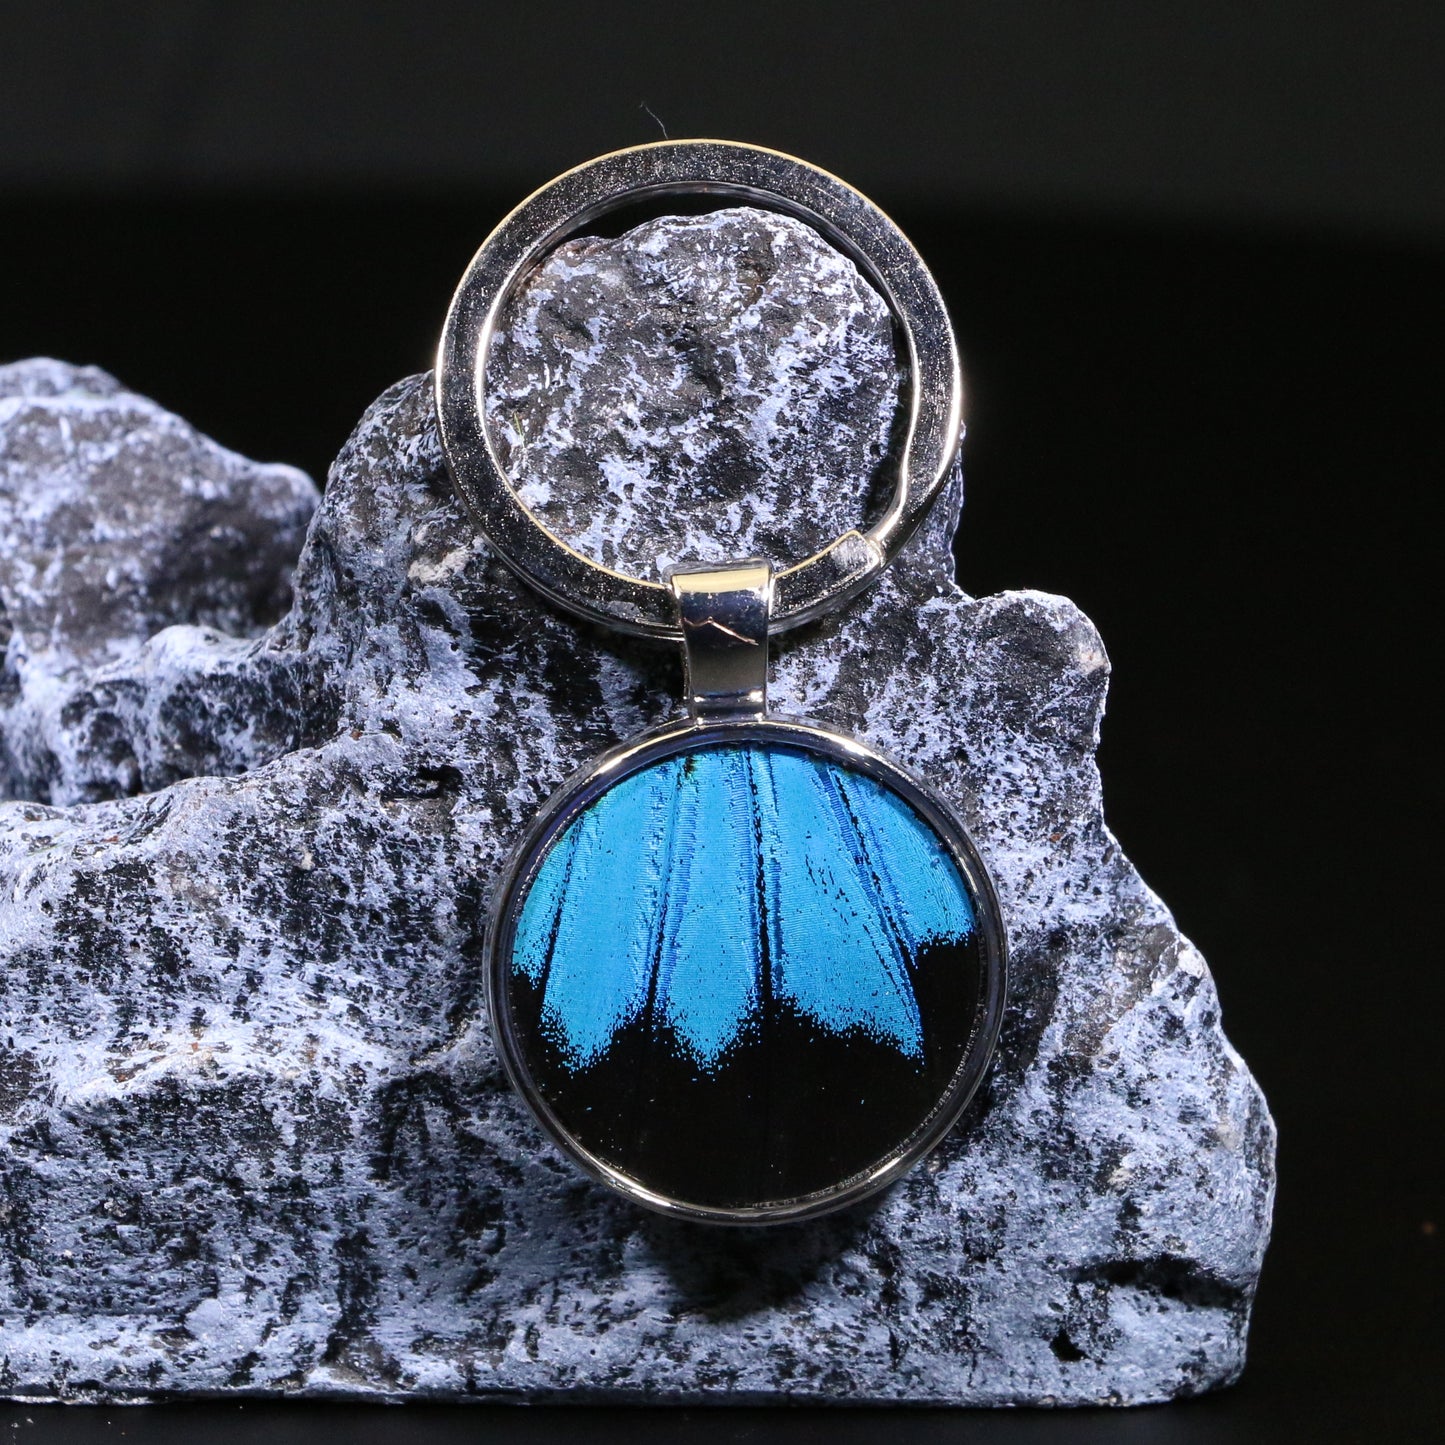 55107 - Real Butterfly Wing Jewelry - Keychain - 25mm - Blue Mountain Swallowtail